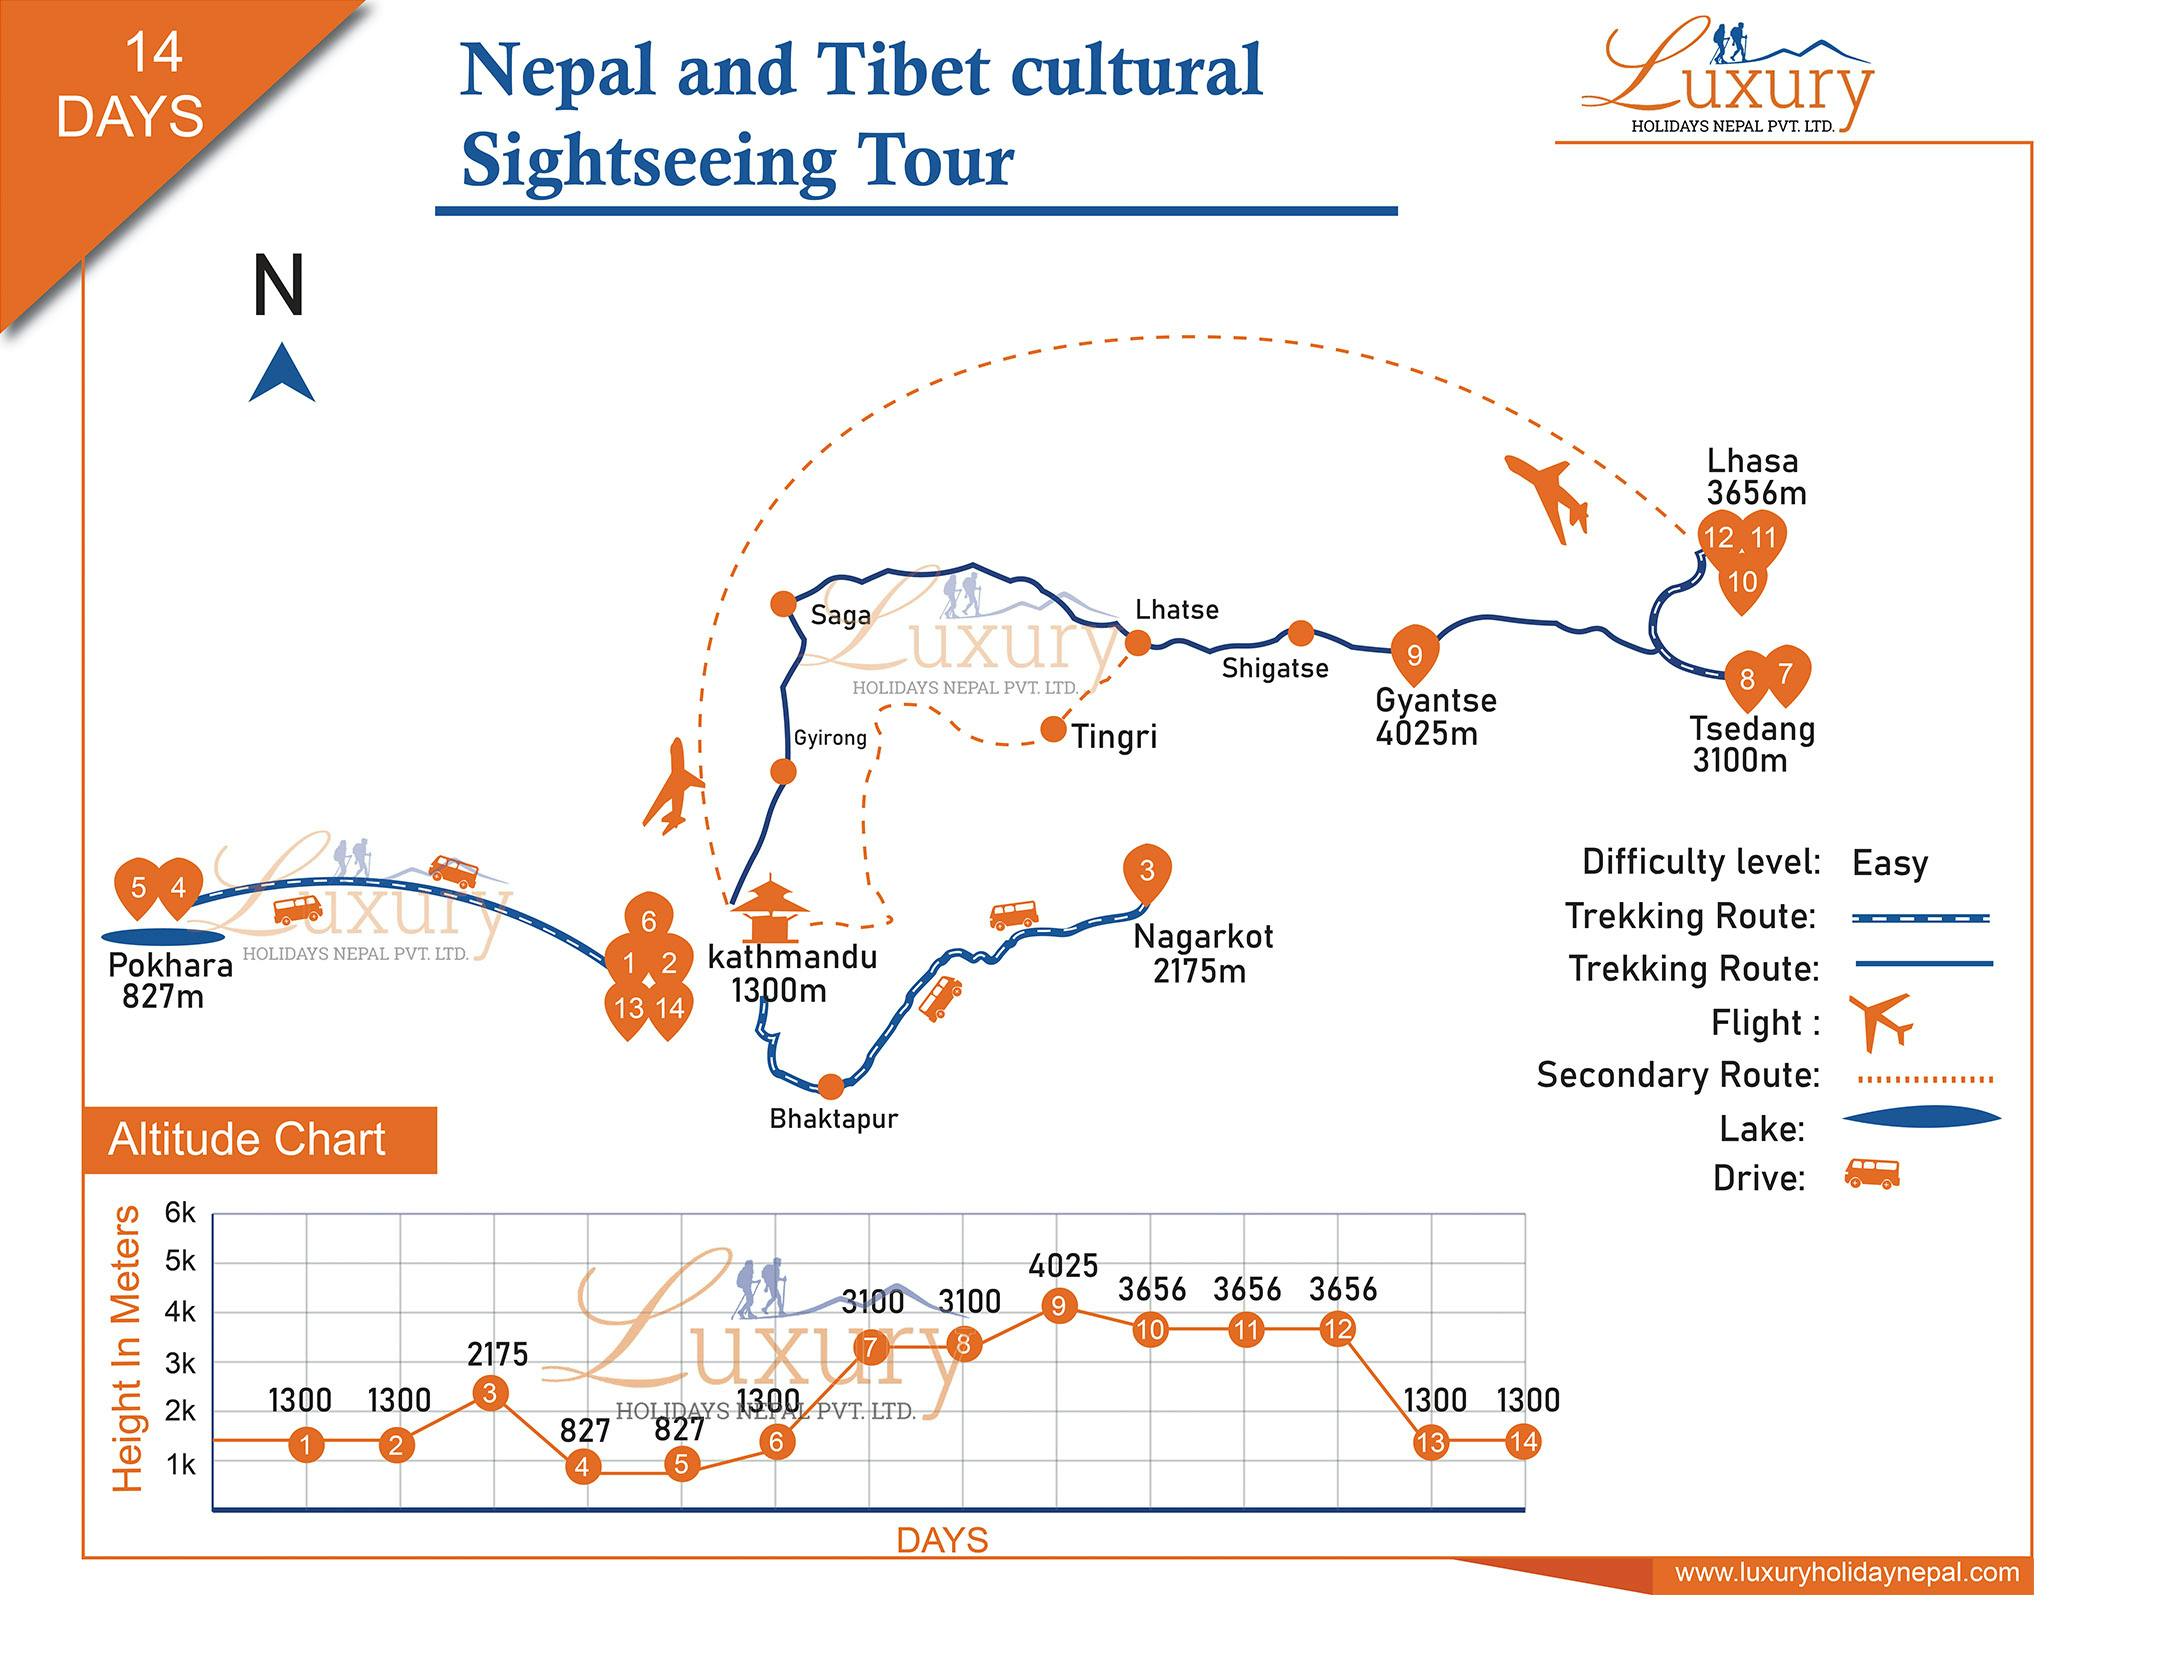 Nepal and Tibet cultural sightseeing TourMap